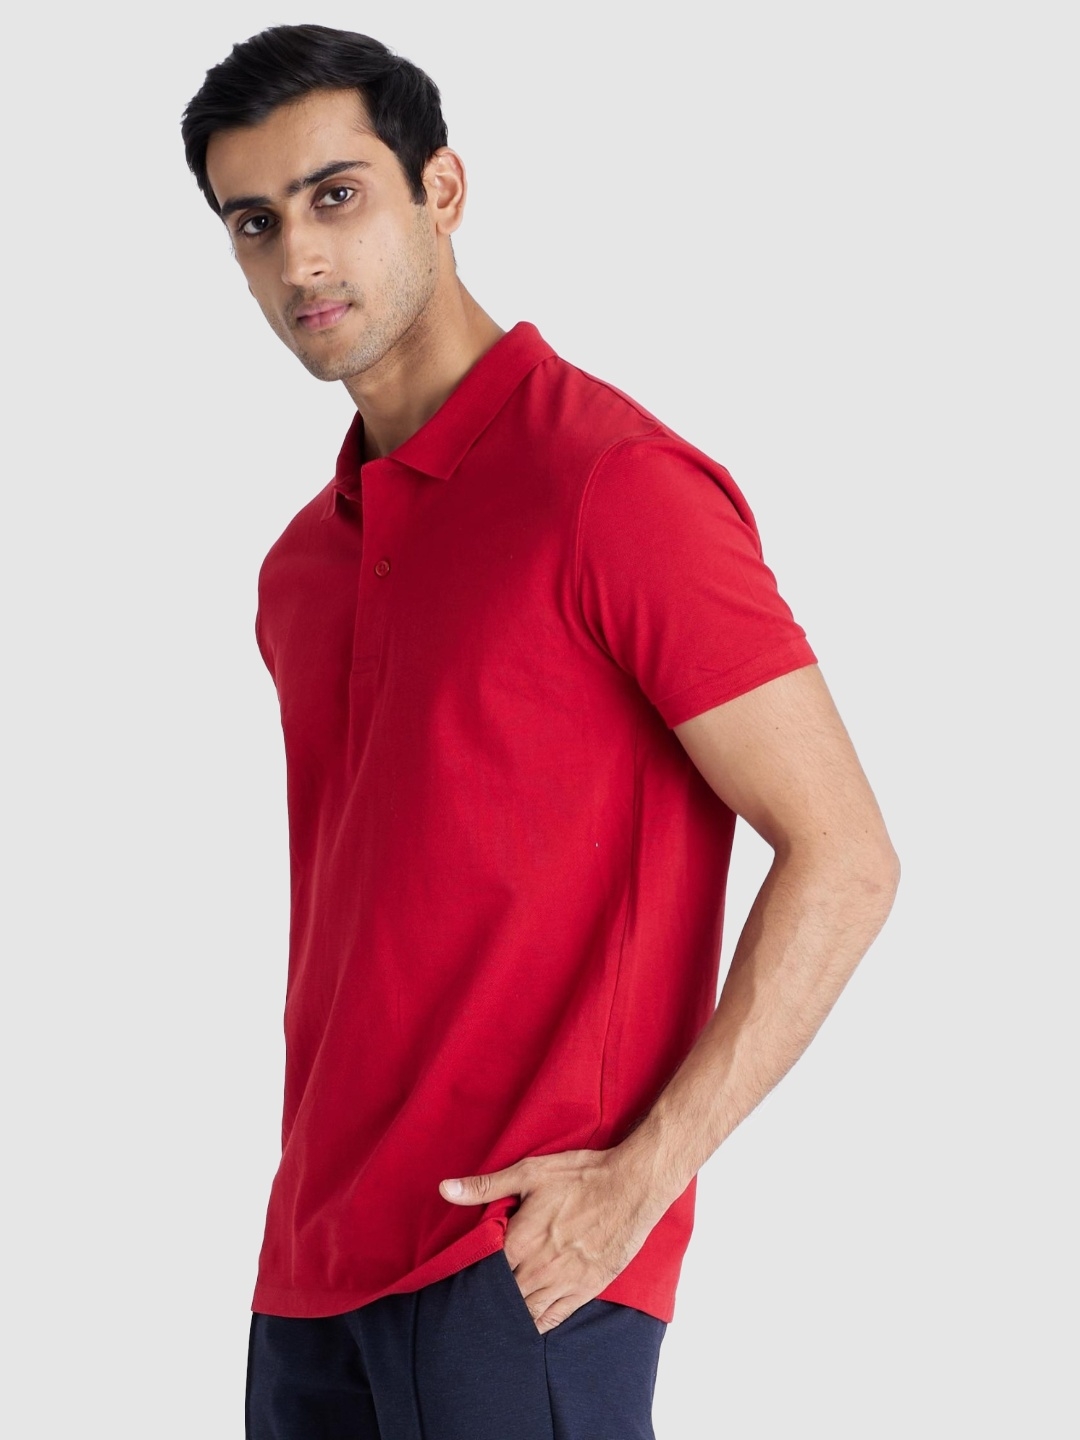 Celio Men Solid Red Short Sleeve Polo